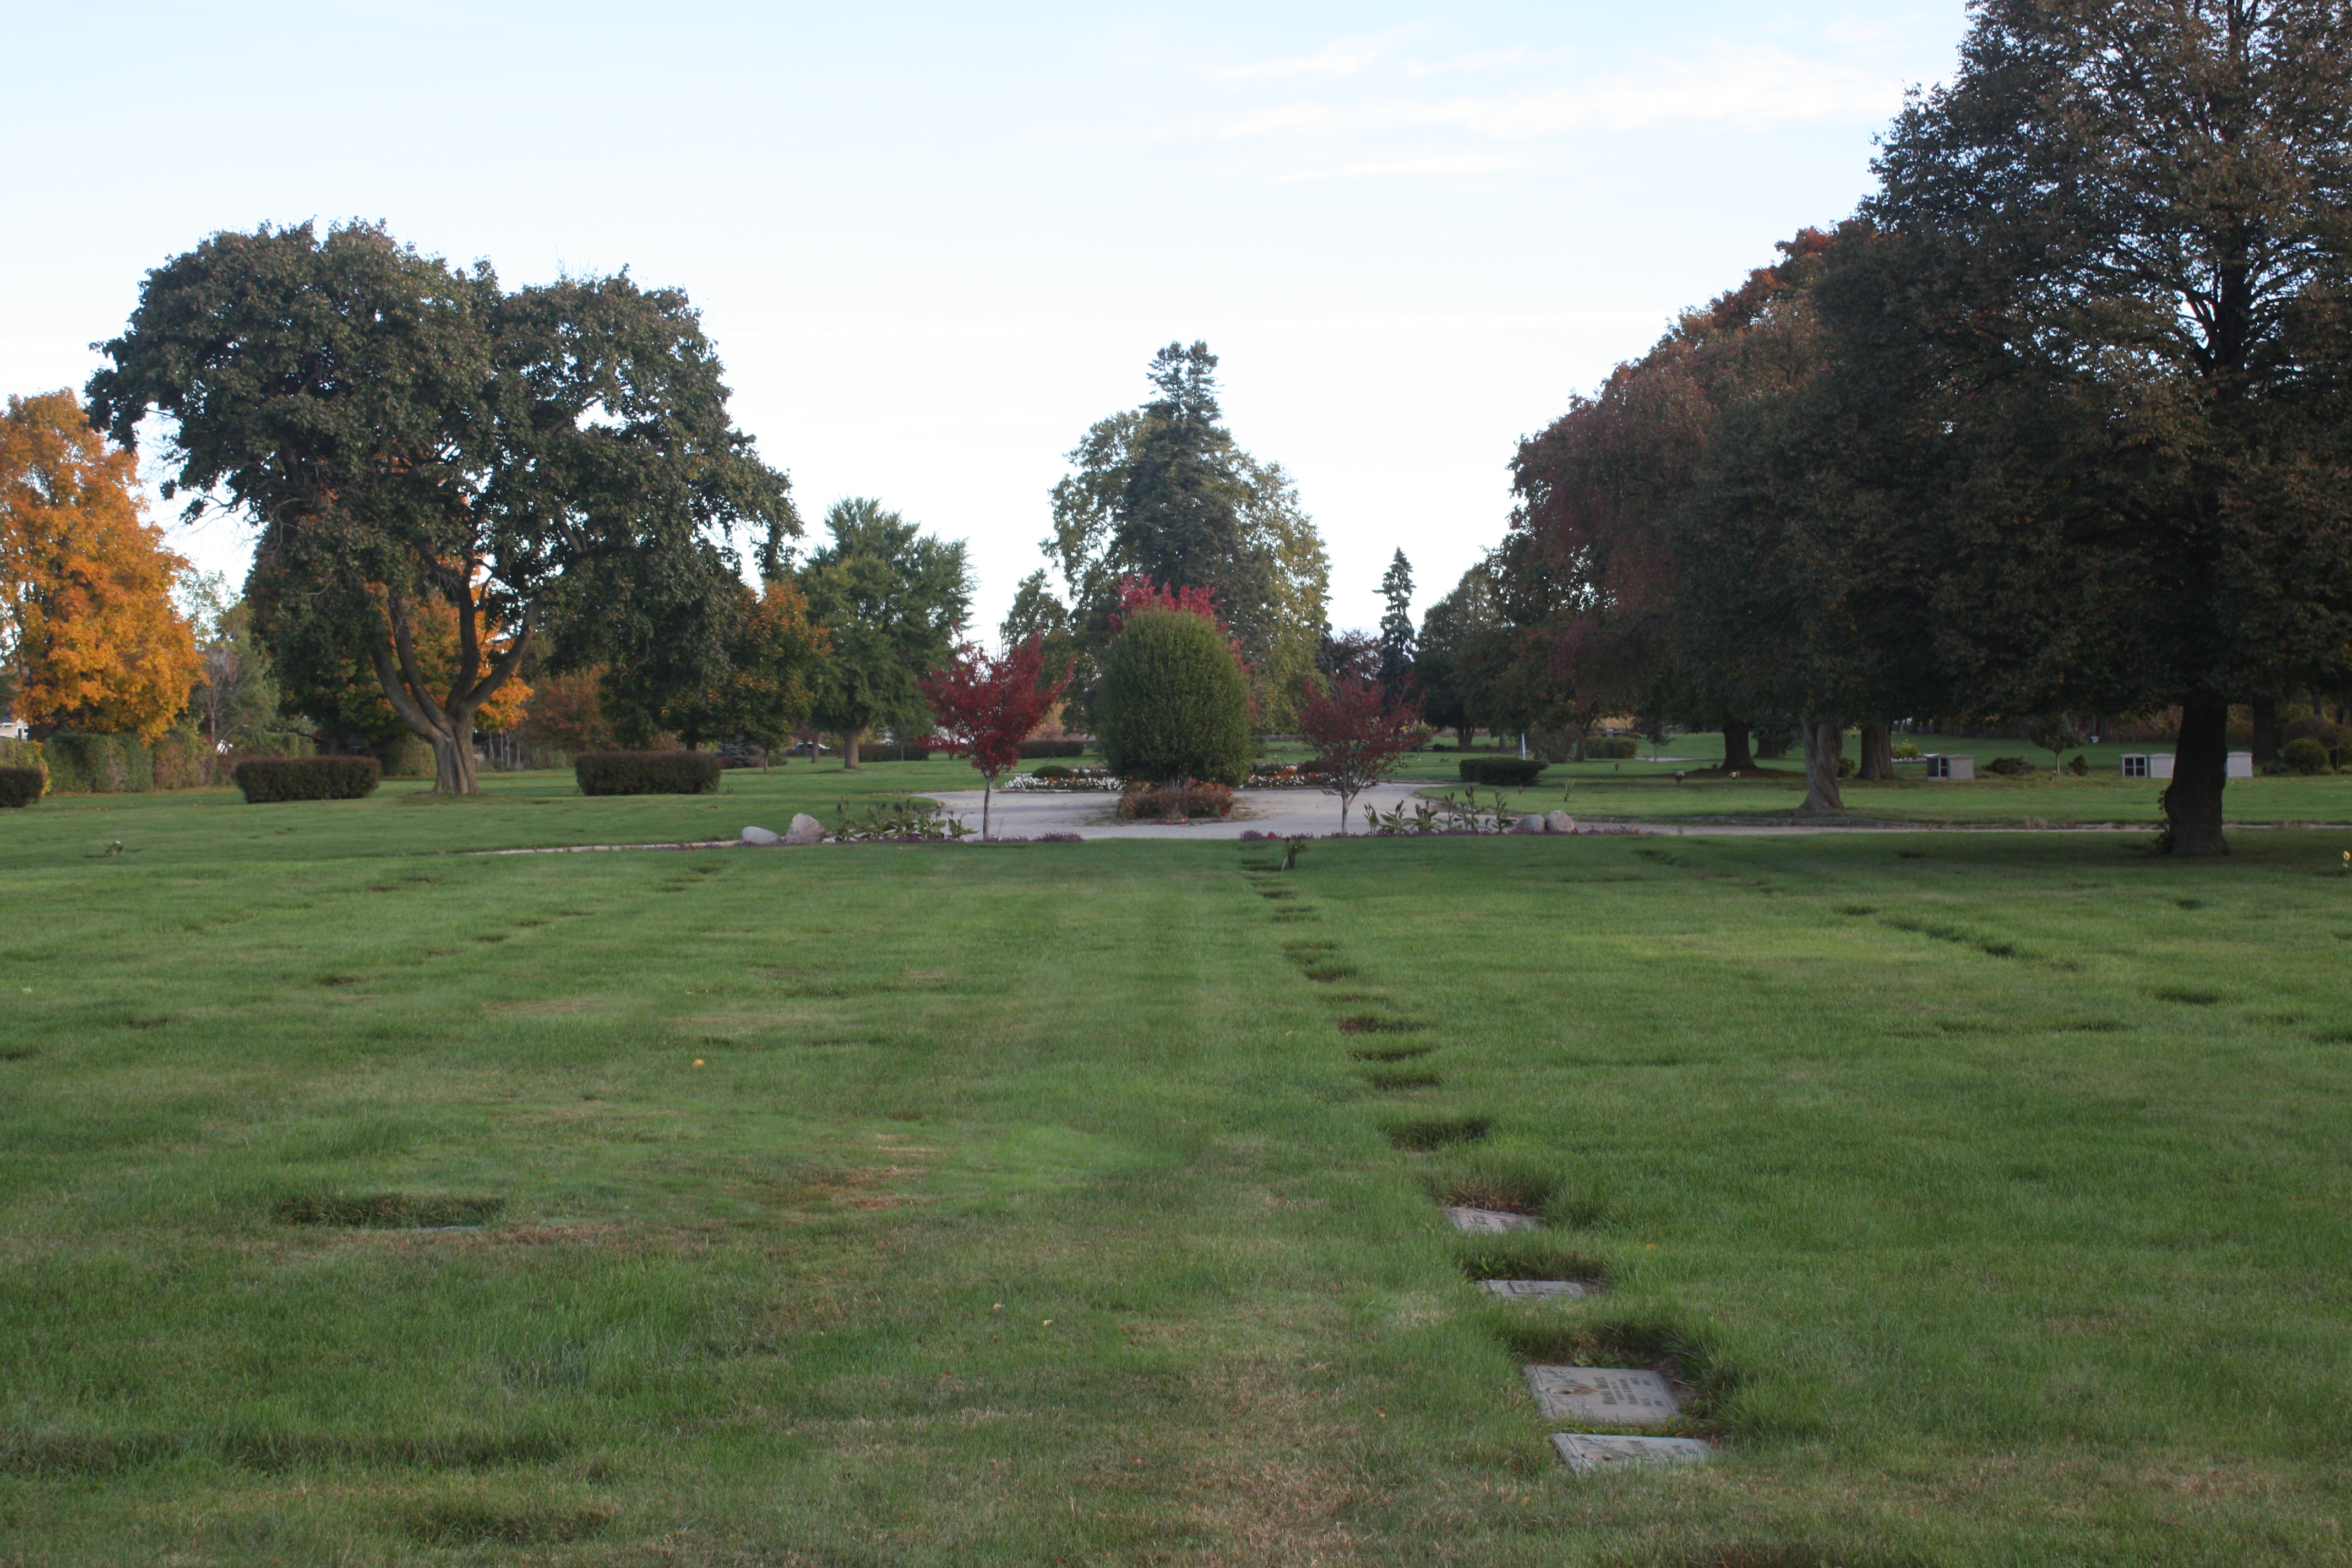 A view of our fine green lawn and grave lots.